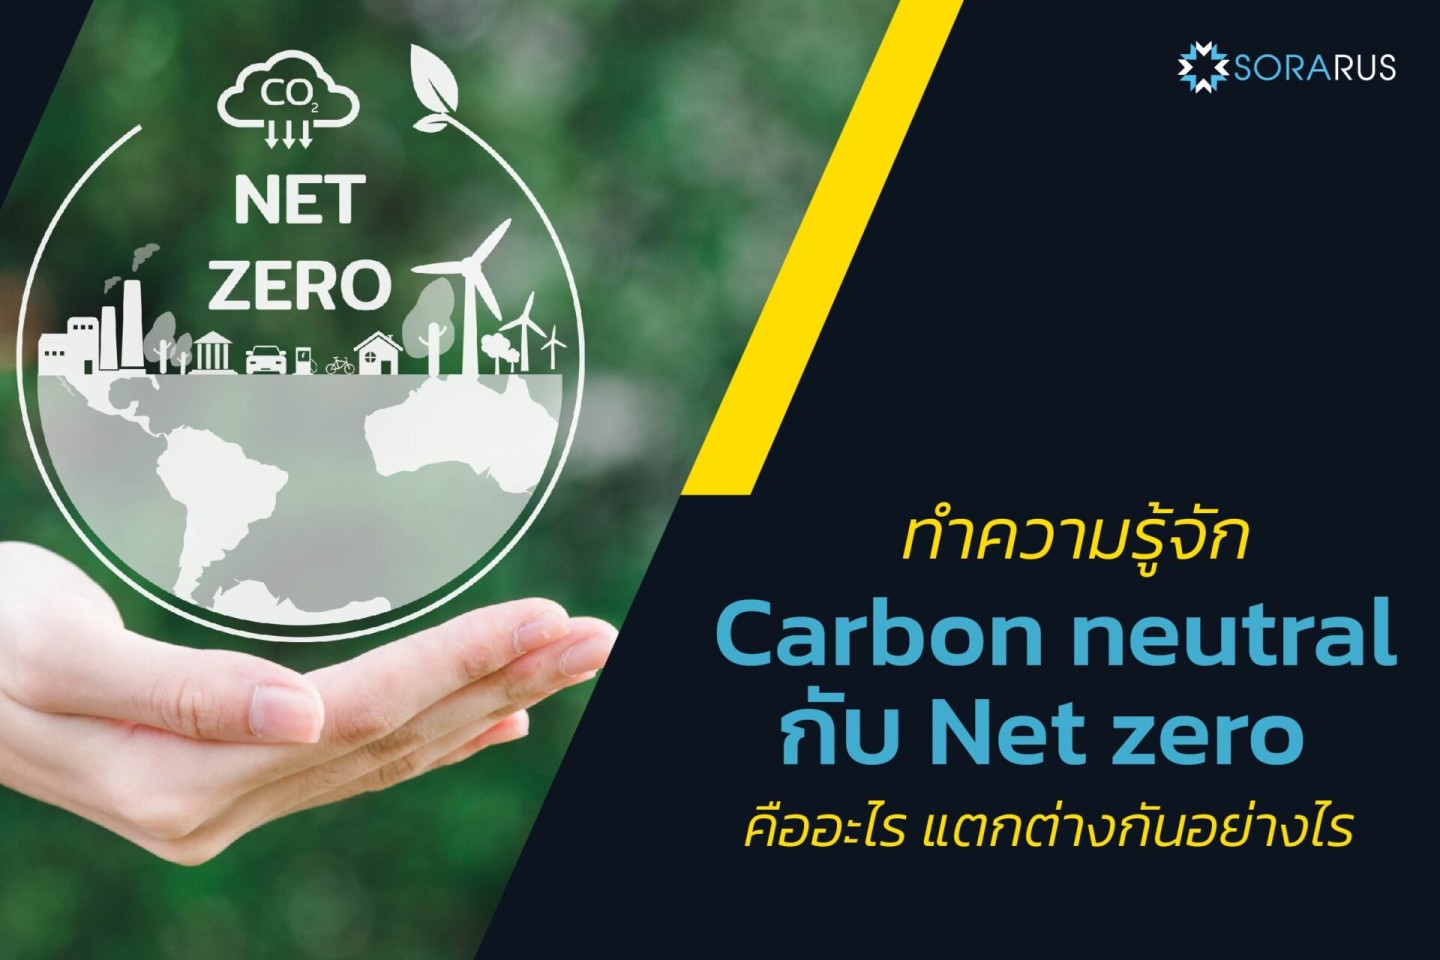 Sorarus - May Article 2 (carbon neutral กับ net zero )-Cover-01